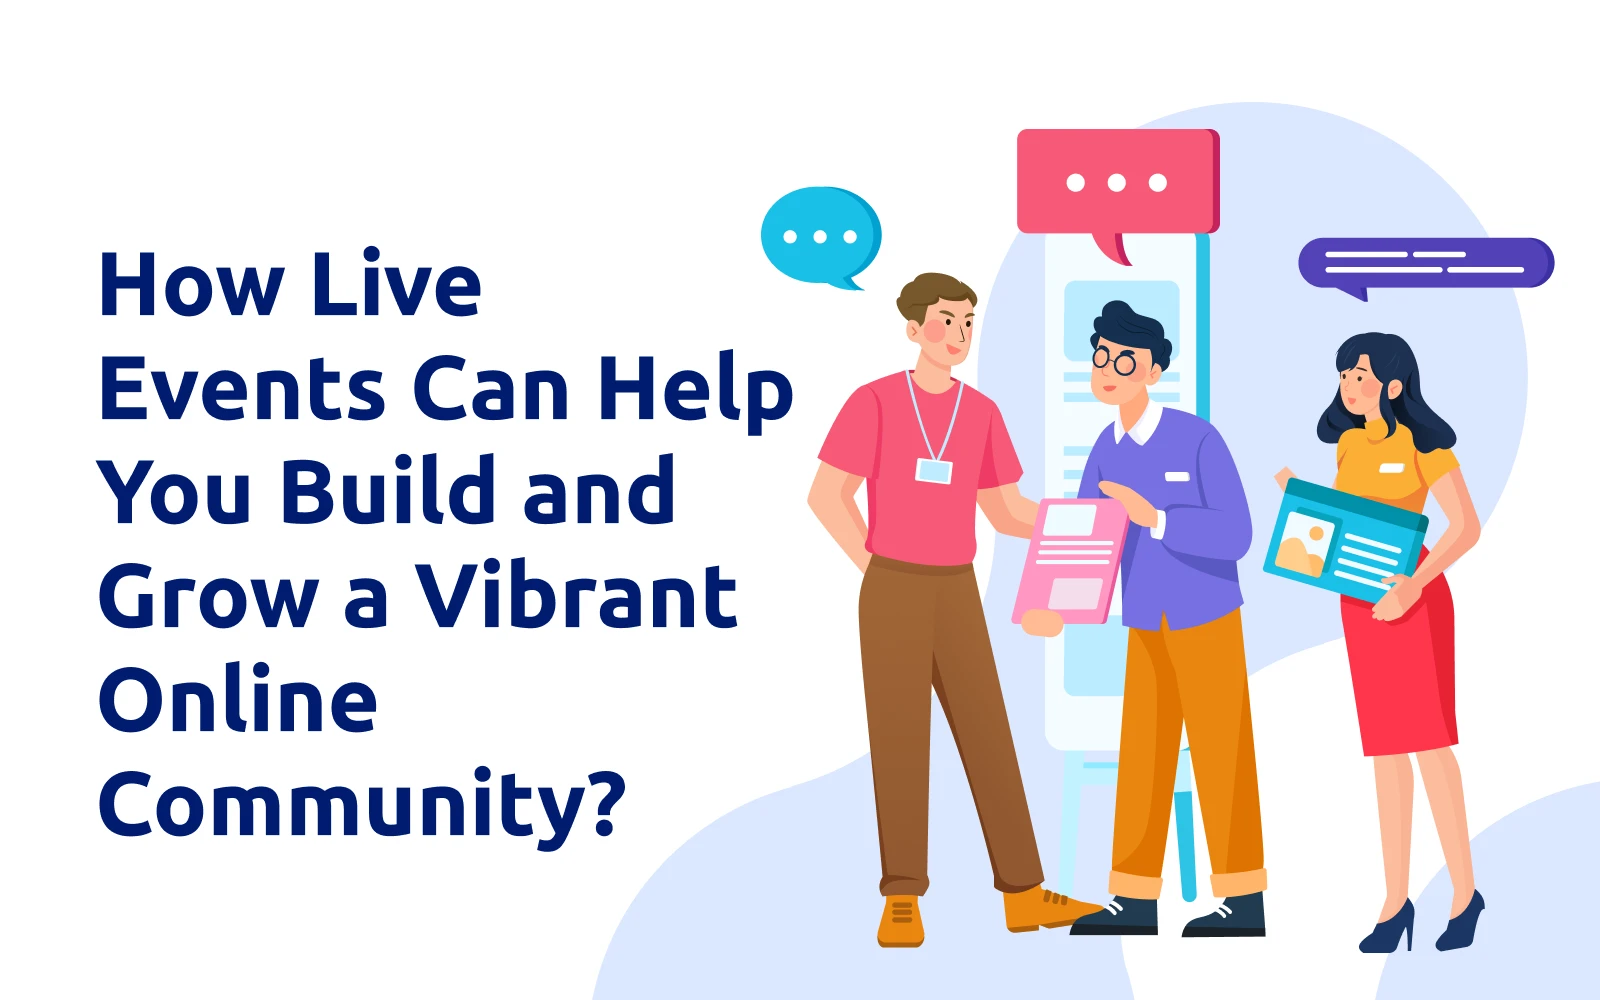 How Live Events Can Help You Build and Grow a Vibrant Online Community?